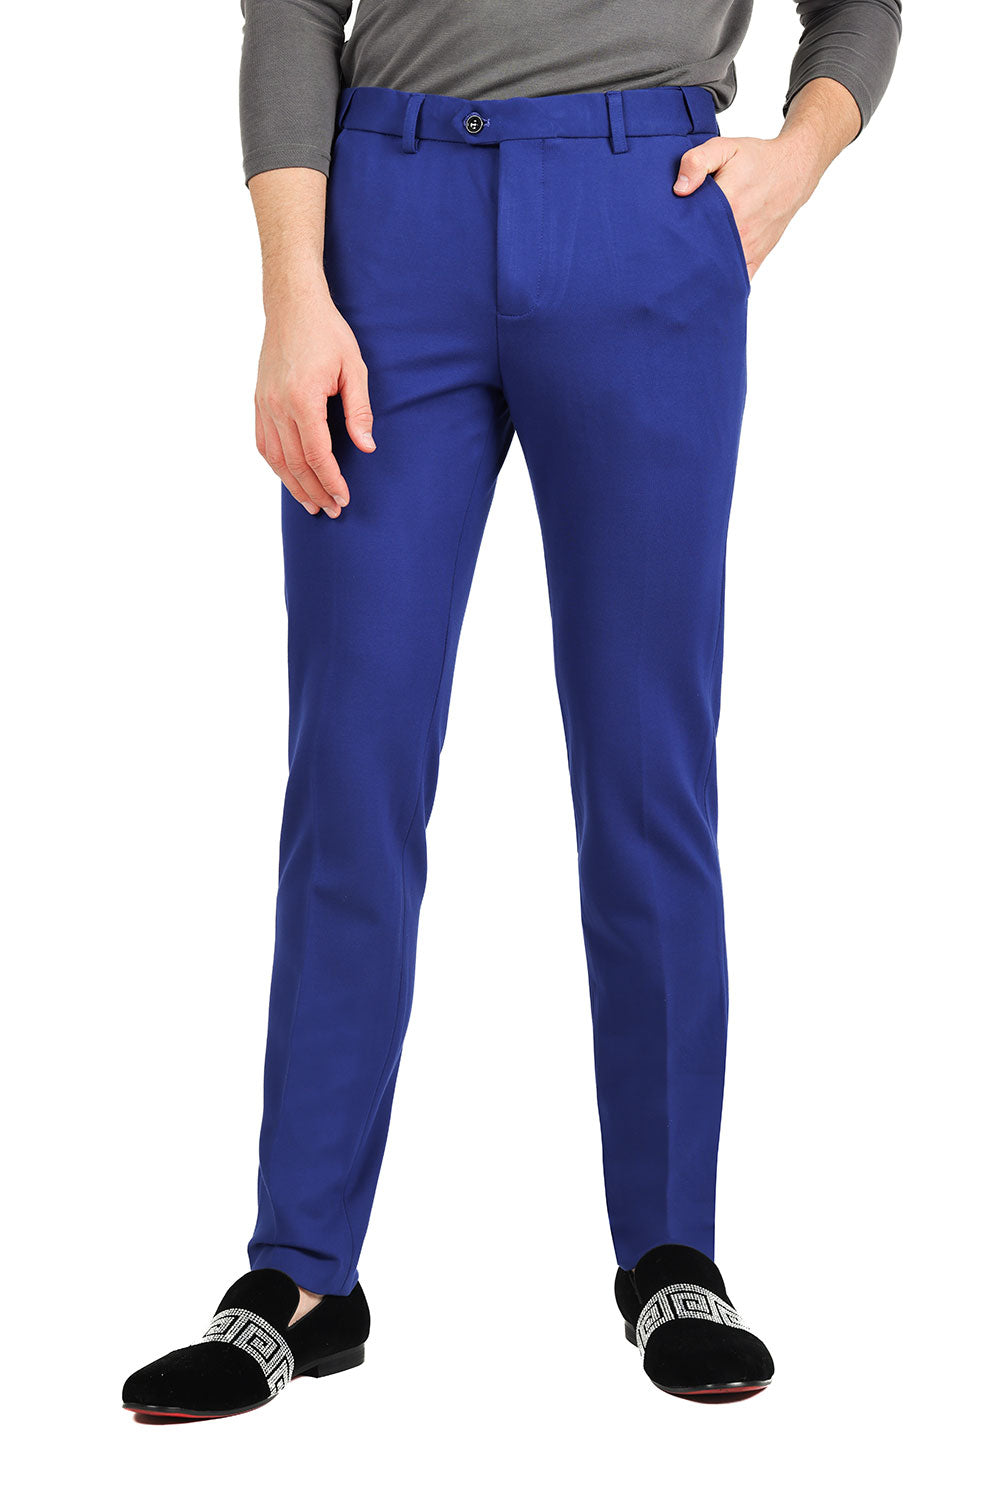 Barabas Men's Solid Color Basic Essential Chino Dress Pants 2CP196 Royal Blue